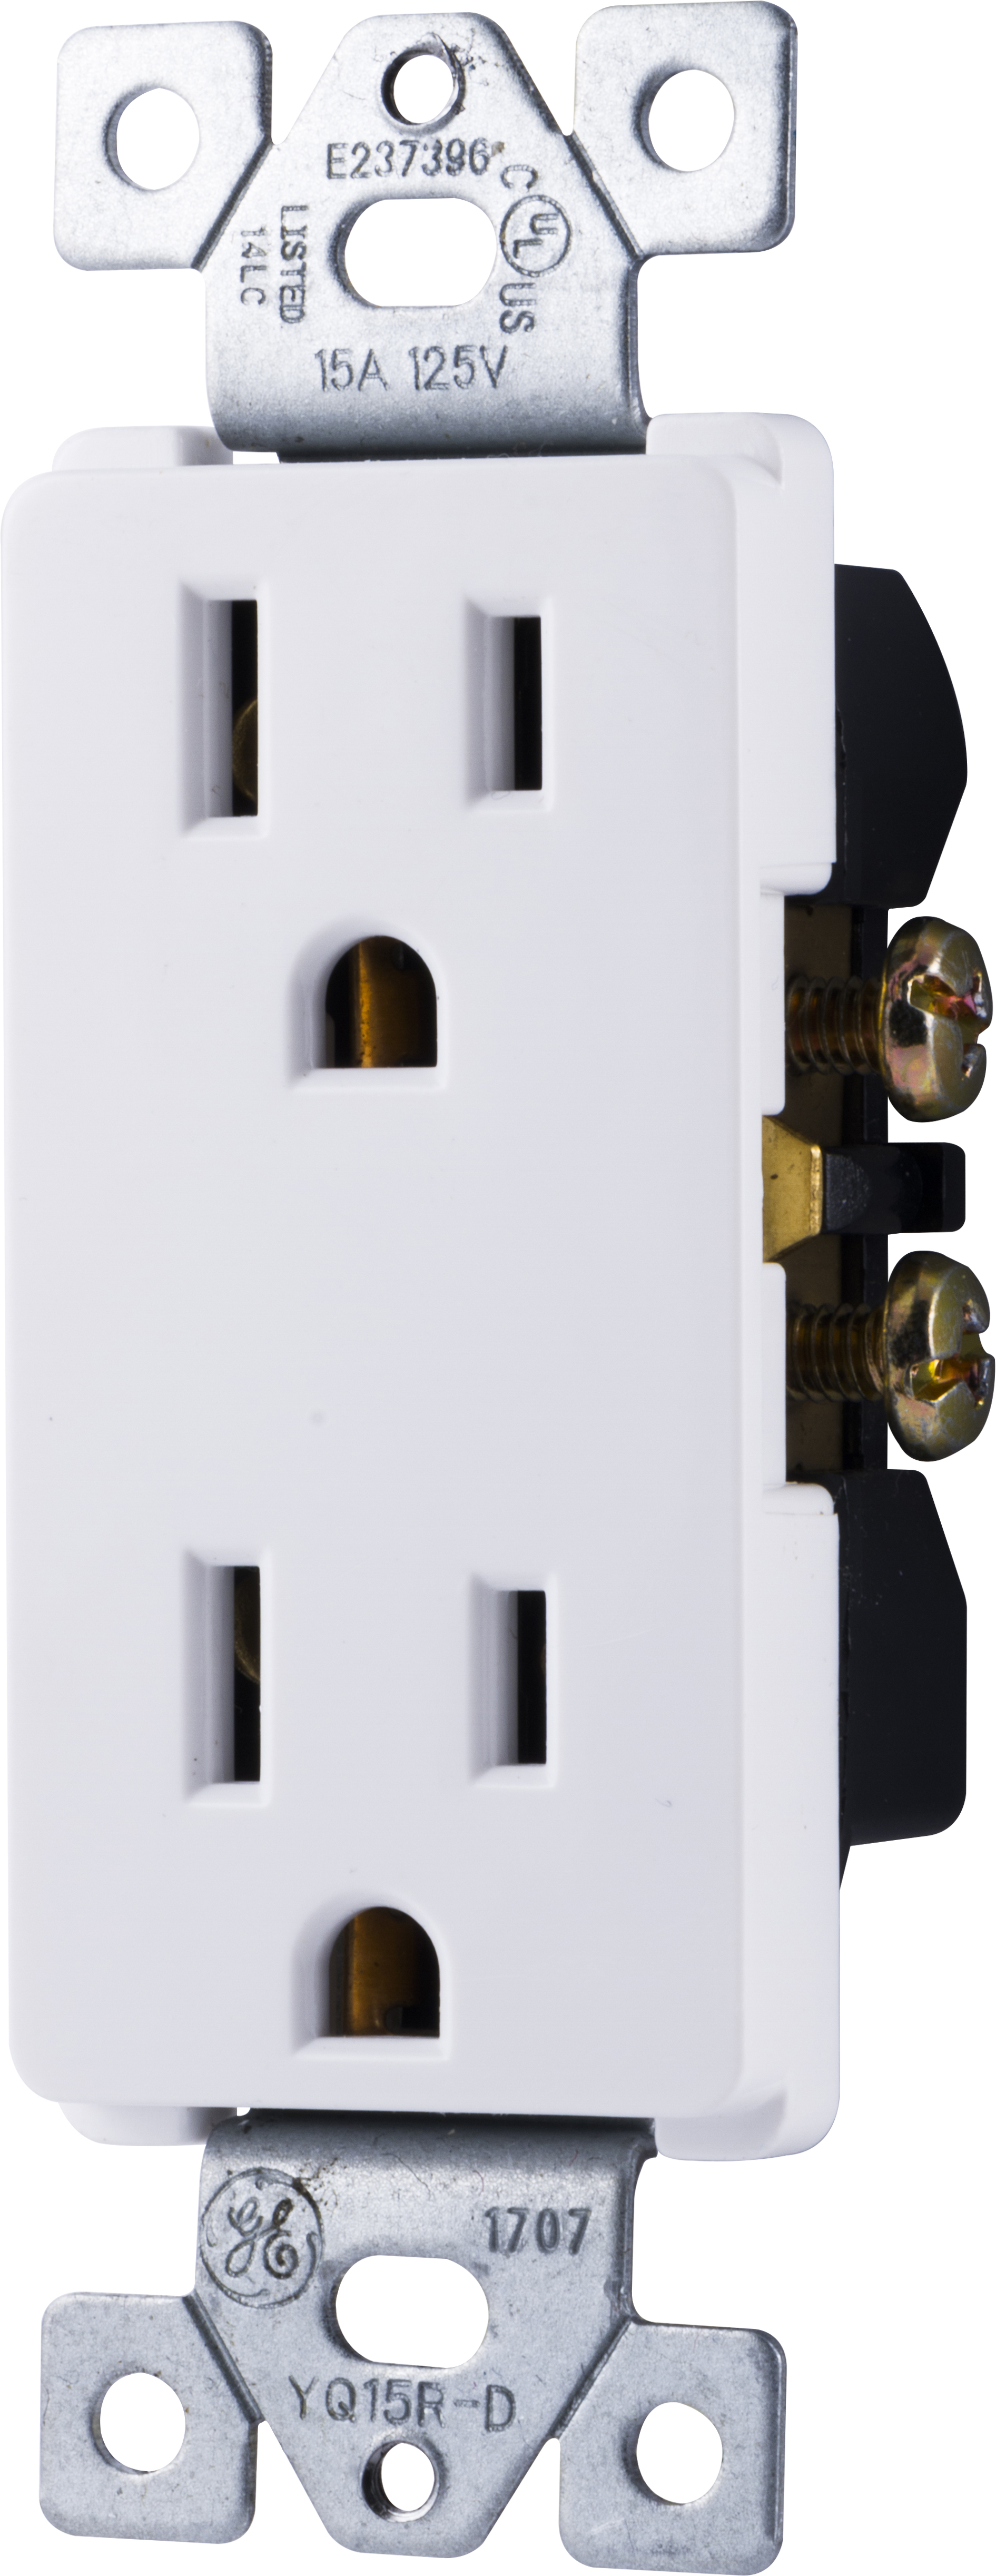 GE Grounding Designer Duplex Electrical Outlet, White 15A - 50727 - image 4 of 5